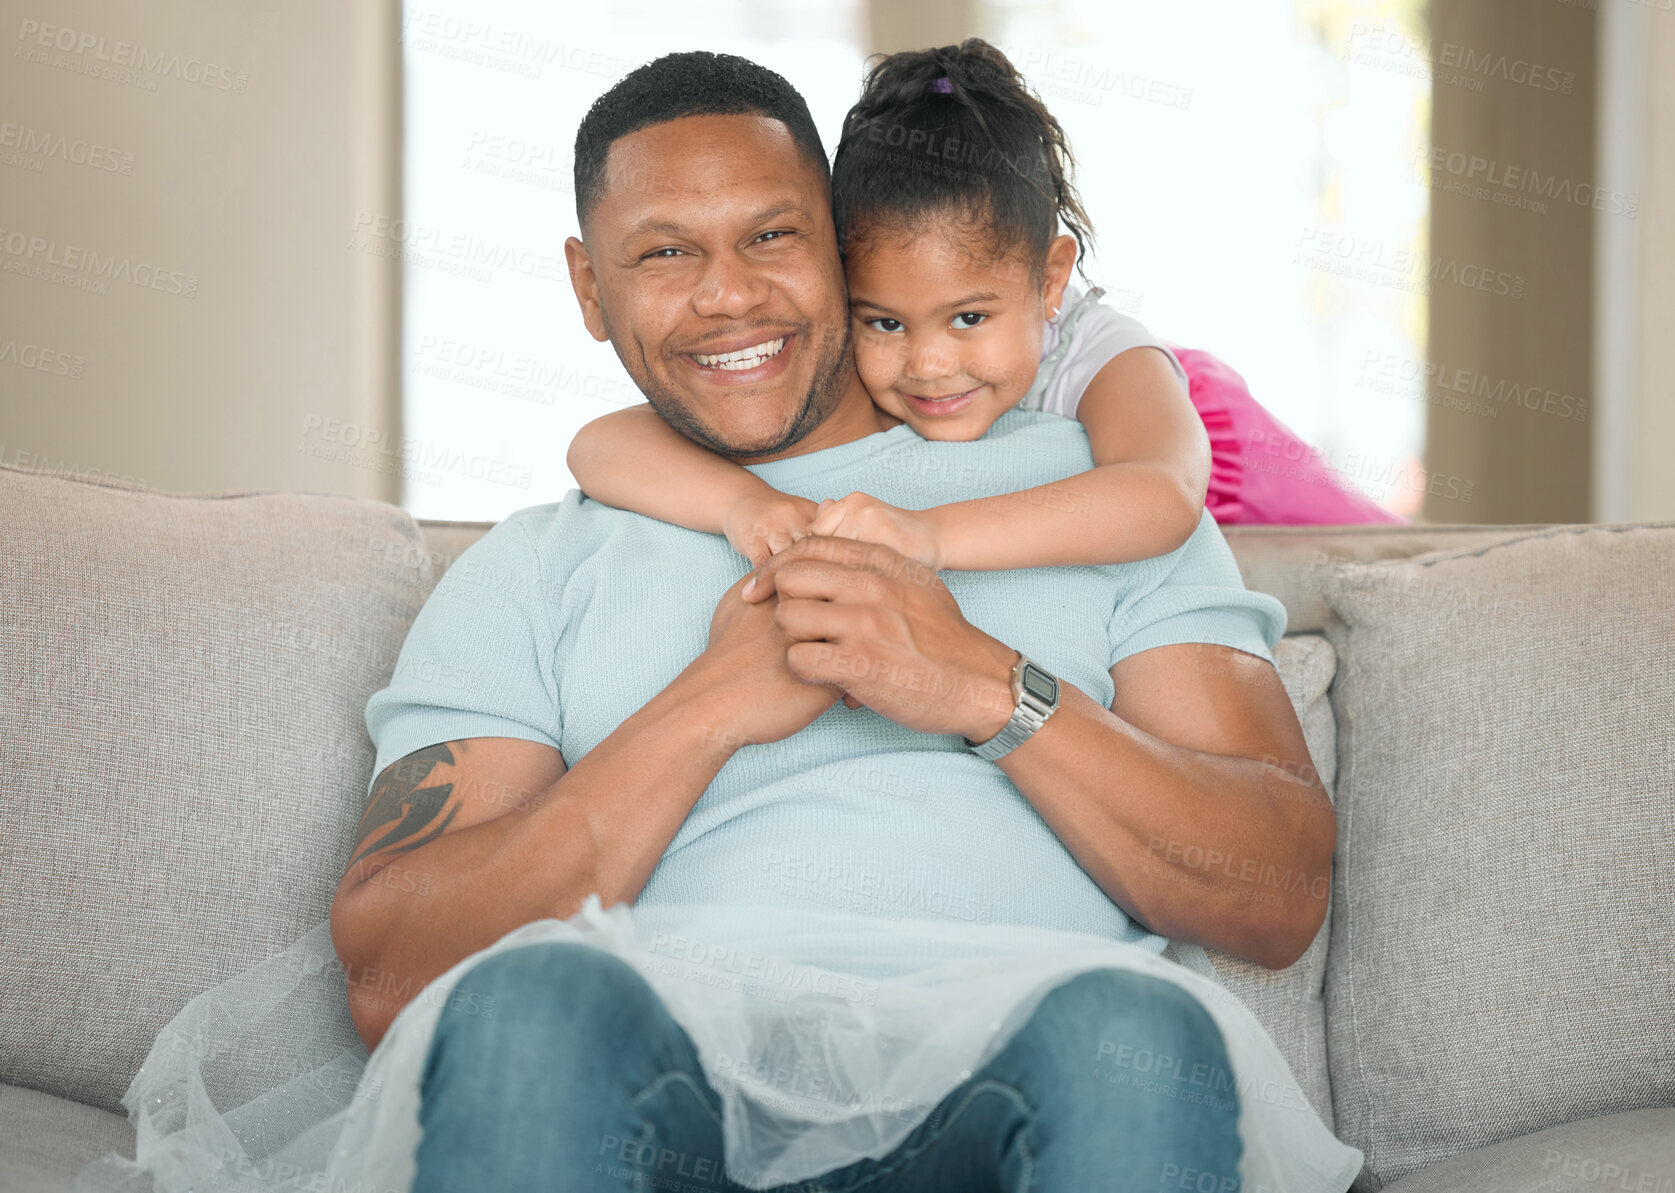 Buy stock photo Shot of an adorable little girl bonding with her father in the living room at home